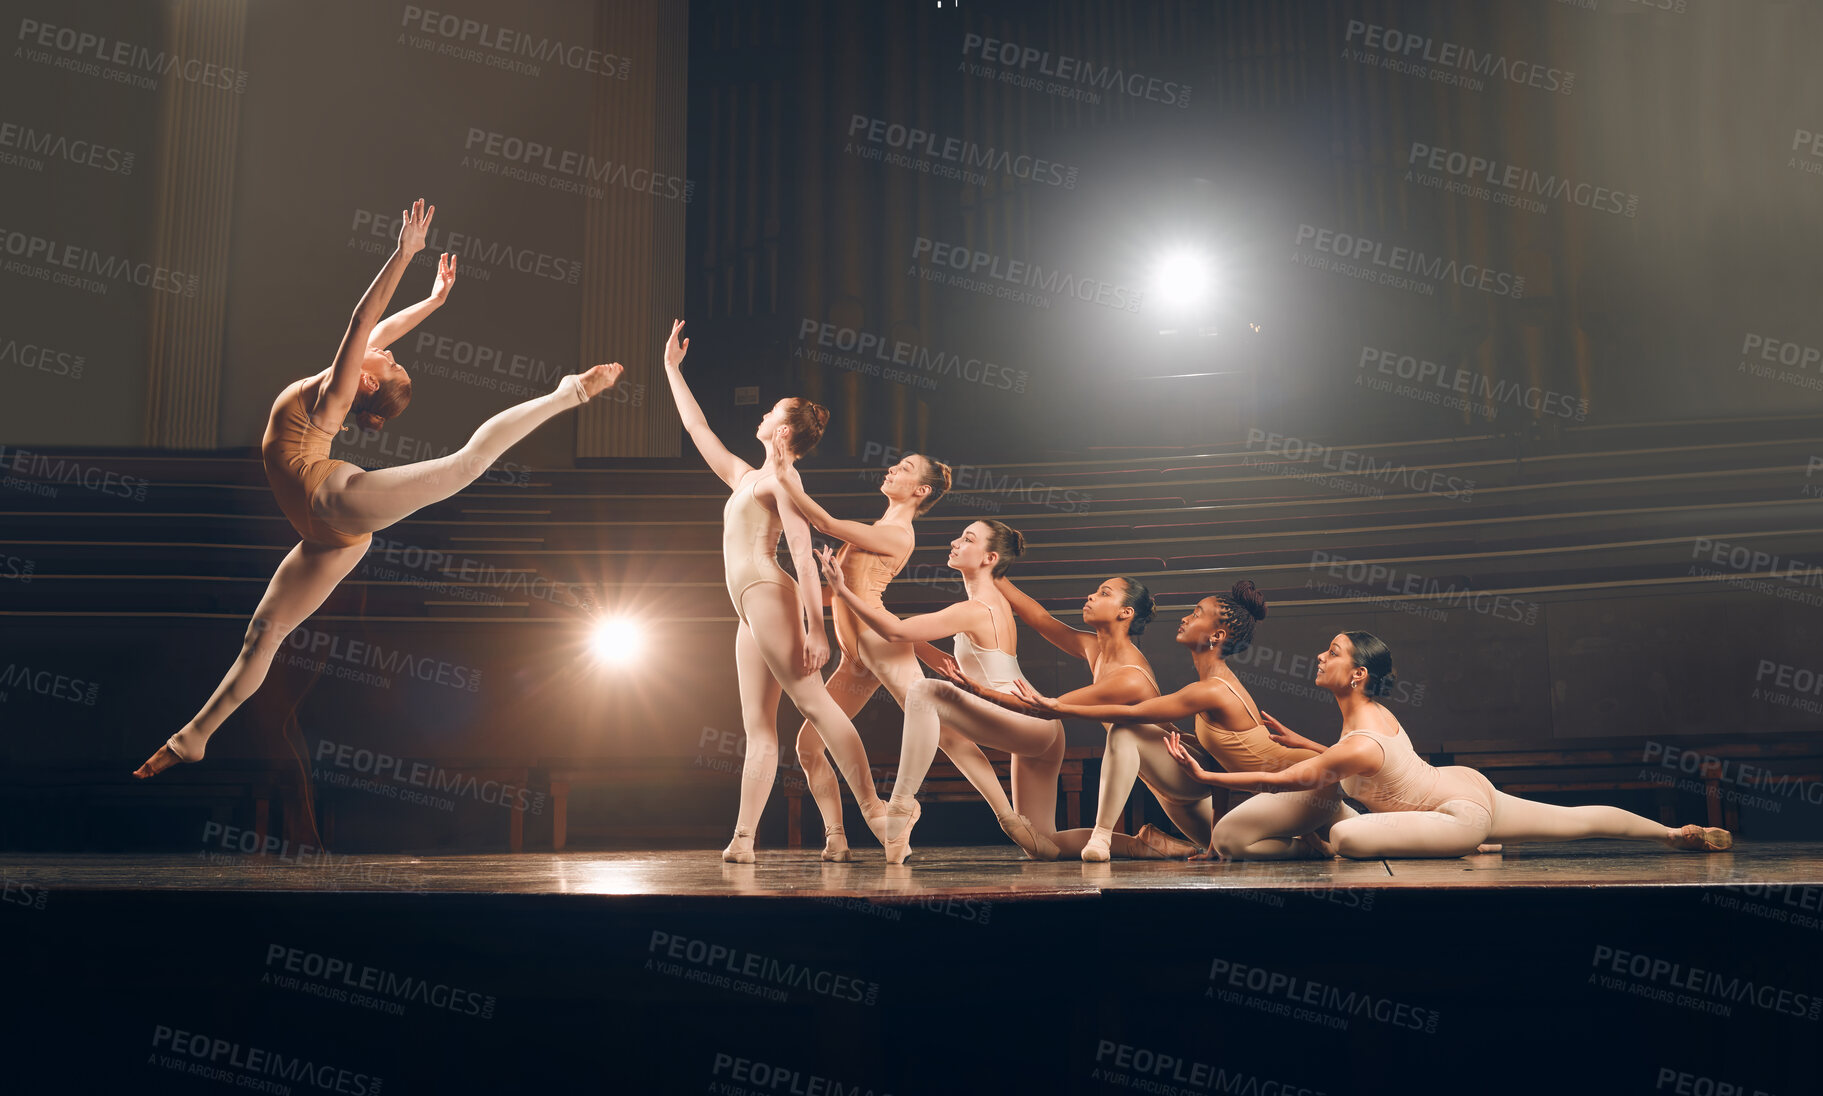 Buy stock photo Shot of a group of ballet dancers practicing a routine on a stage